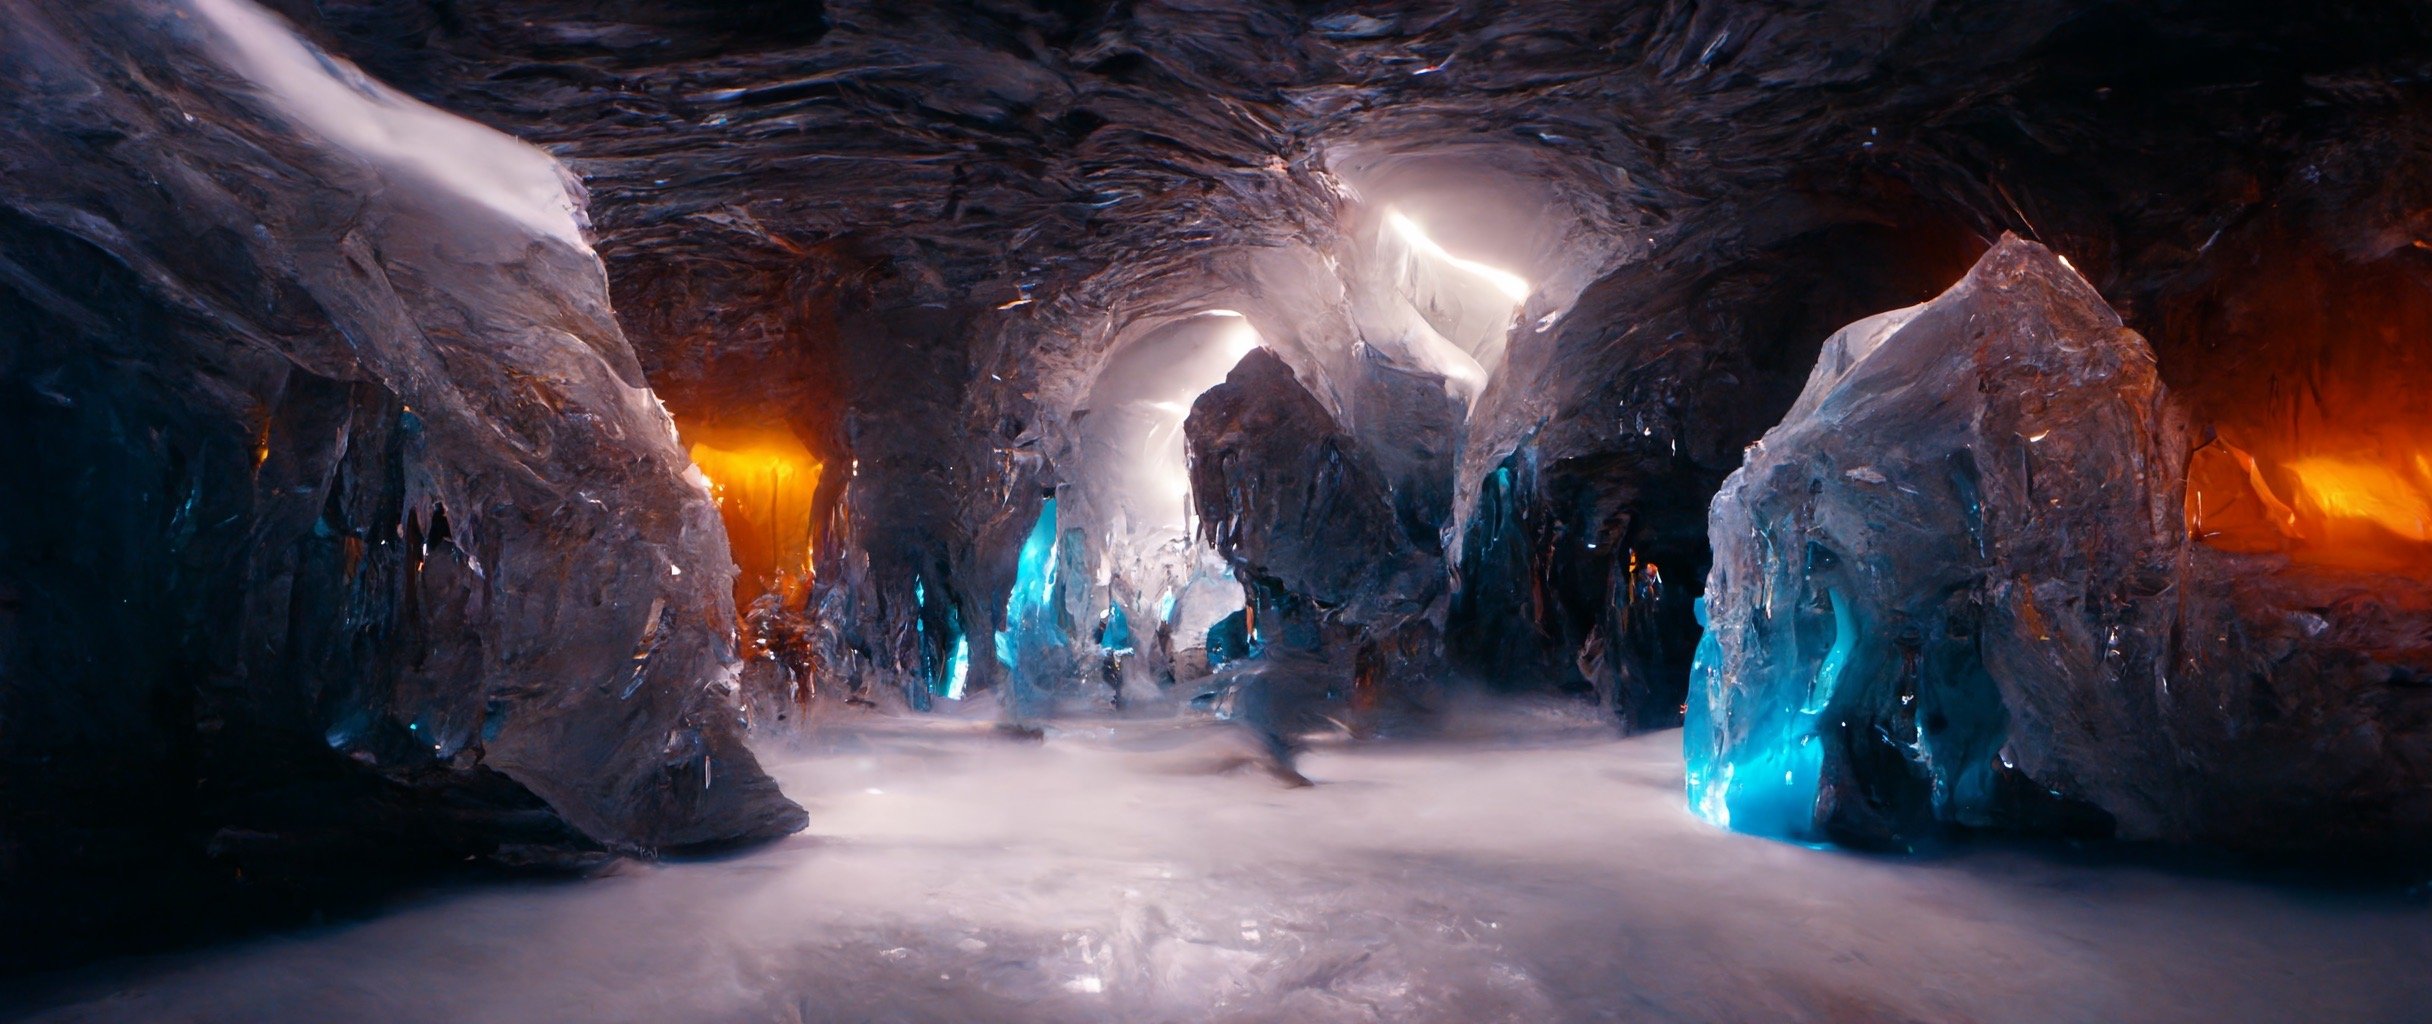 2637d82f-0753-4929-8c2e-6340552339e7_S3RAPH_epic_video_game_style_boss_fight_in_mystical_detailed_ice_cave._motion_blur_attack._8k_cinematic_com.JPG